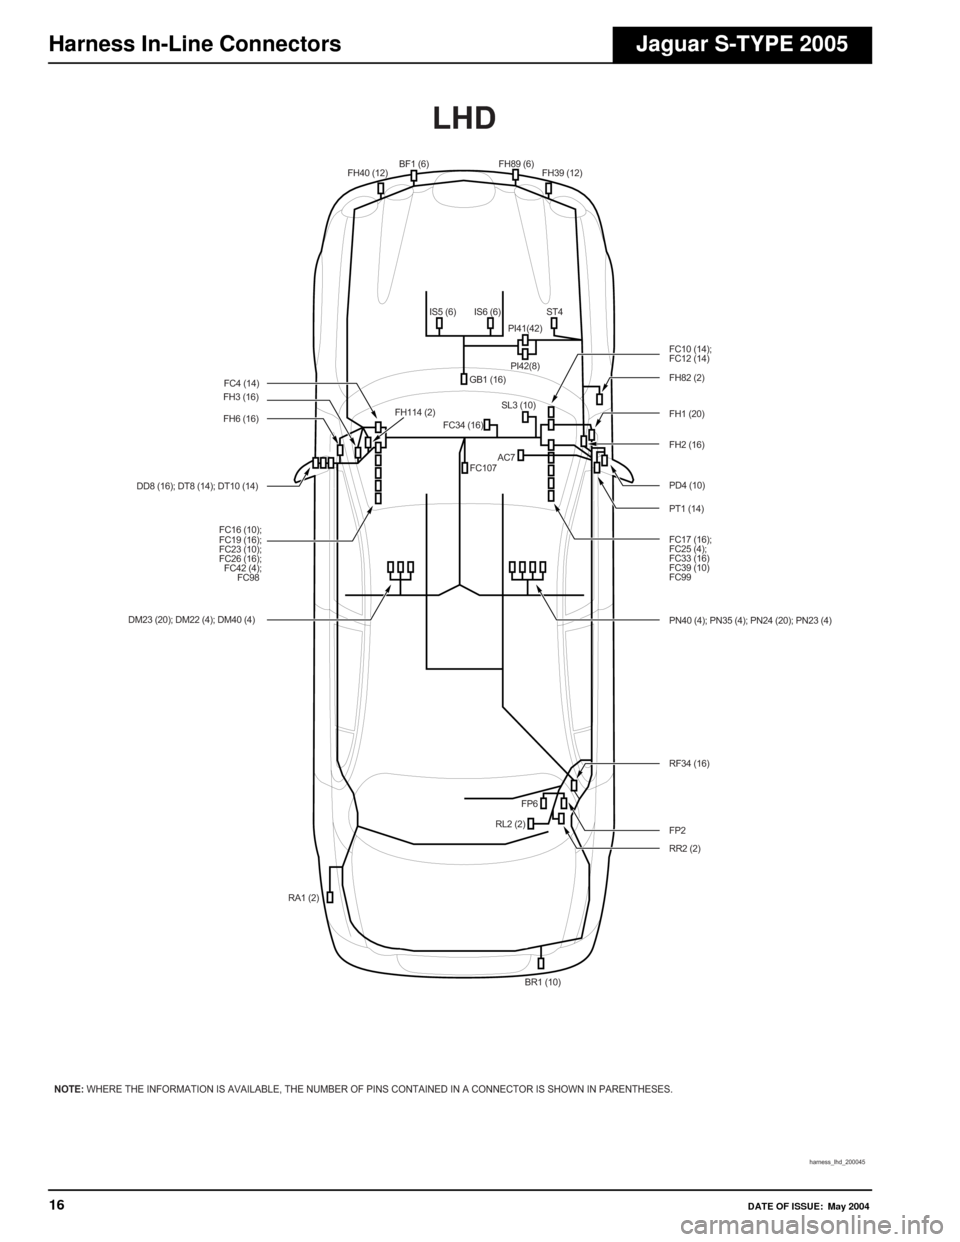 JAGUAR S TYPE 2005 1.G Electrical Manual 
16DATE OF ISSUE: May 2004
Harness In-Line ConnectorsJaguar S-TYPE 2005
FC4 (14)
FC19 (16); FC16 (10);
FC23 (10);
FC26 (16); FC42 (4); FC98
FH3 (16)
FH114 (2)
FH6 (16)
PN40 (4); PN35 (4); PN24 (20); P